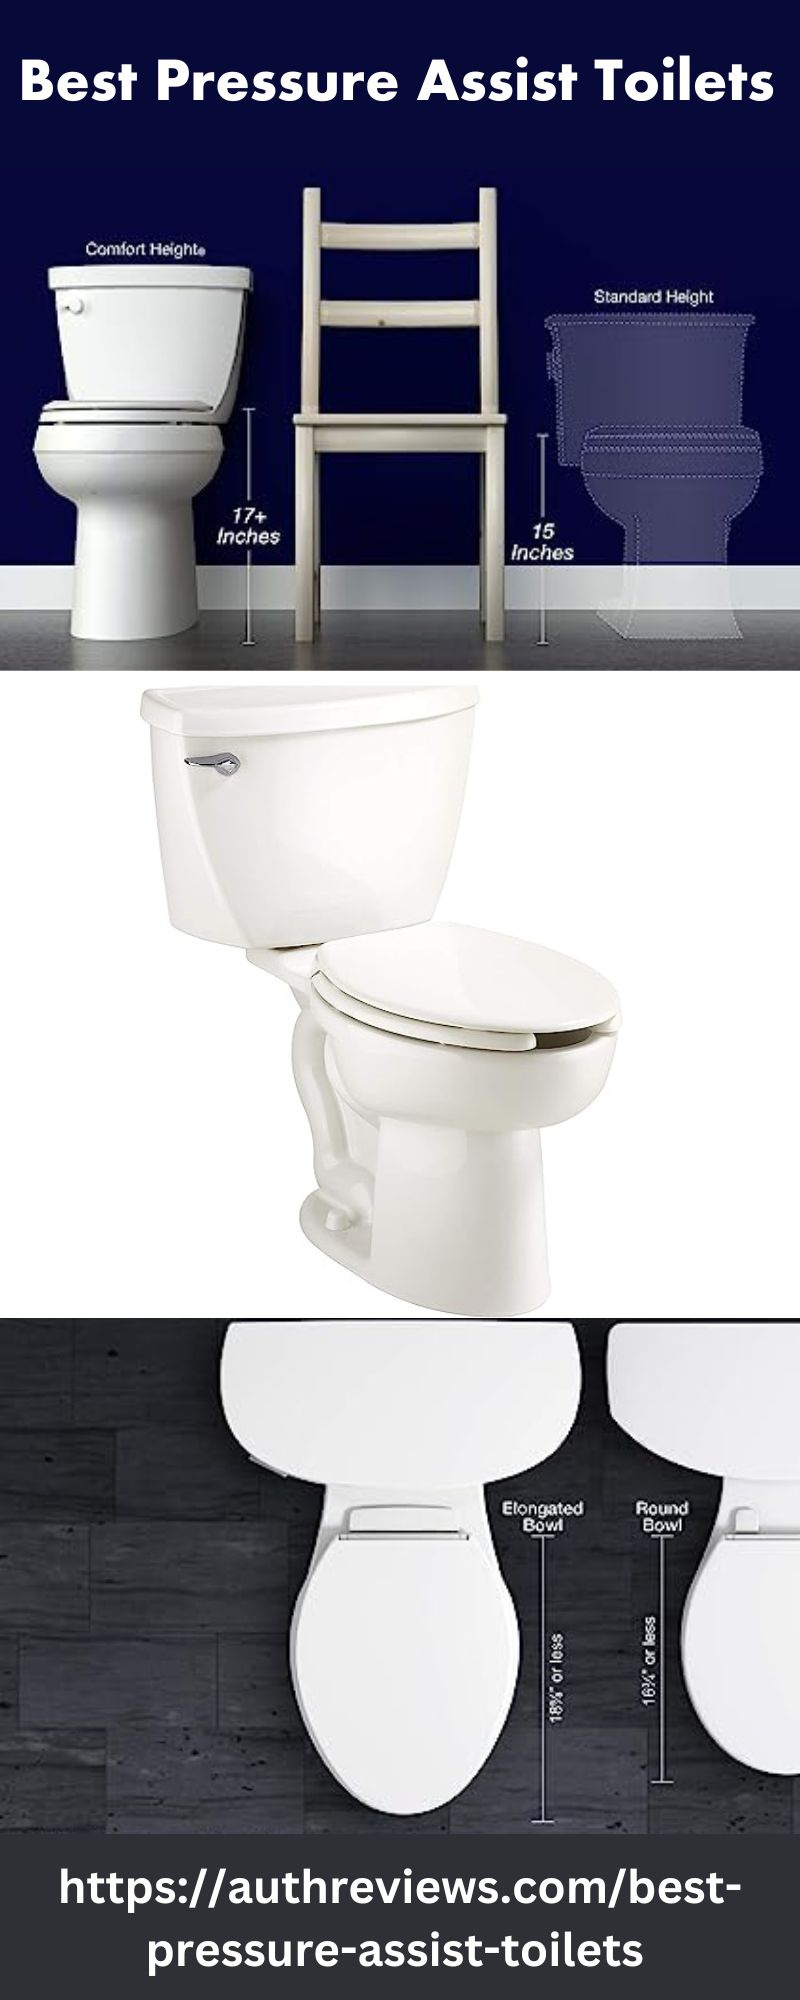 Best Pressure Assist Toilets by Auth Reviews on Dribbble